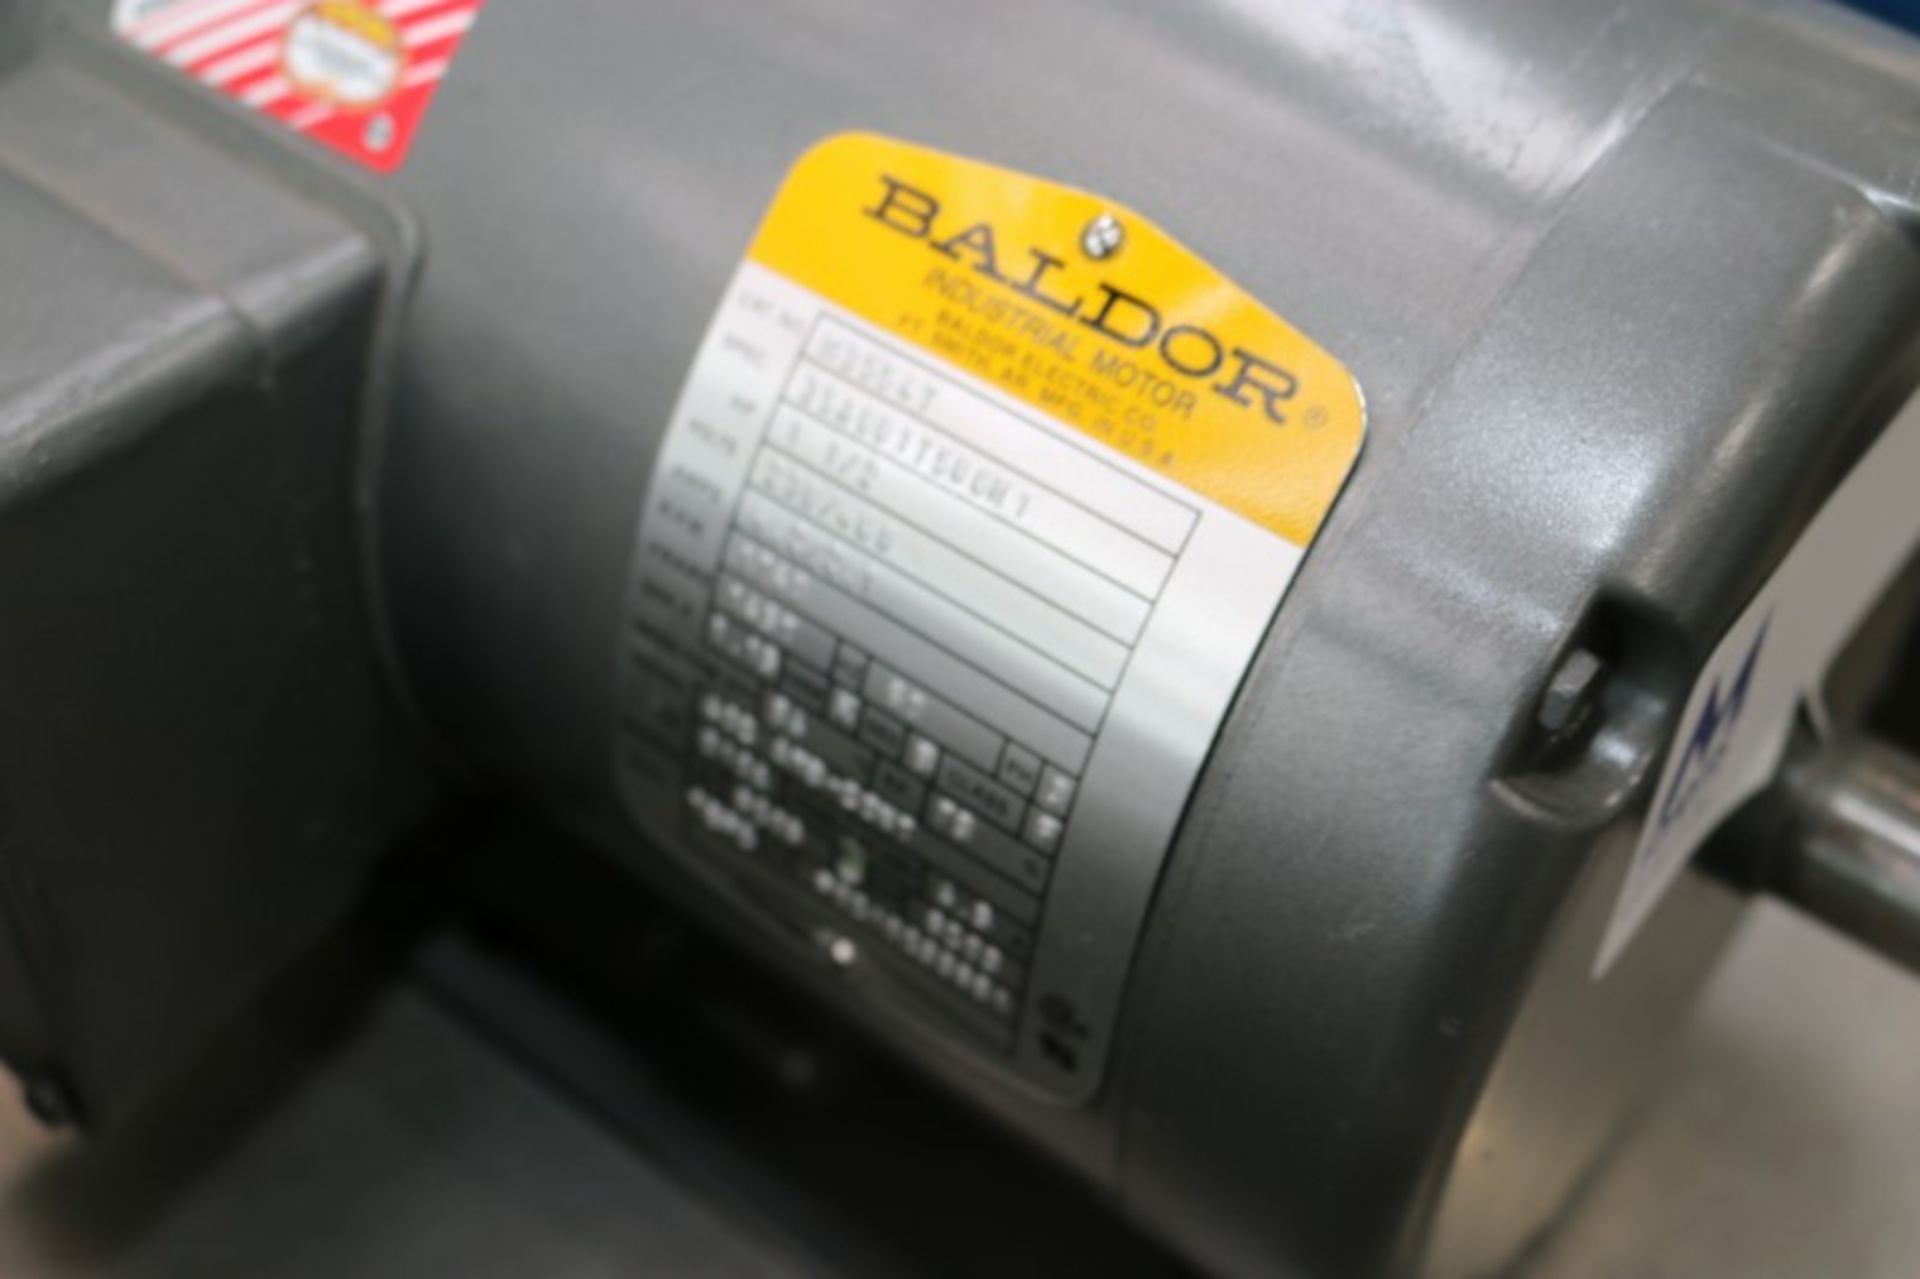 (2) NEW Baldor 1-1/2 hp Motors,230/460 Volts, 3 Phase, 1740 RPM (INV#81041)(Located @ the MDG - Image 5 of 5